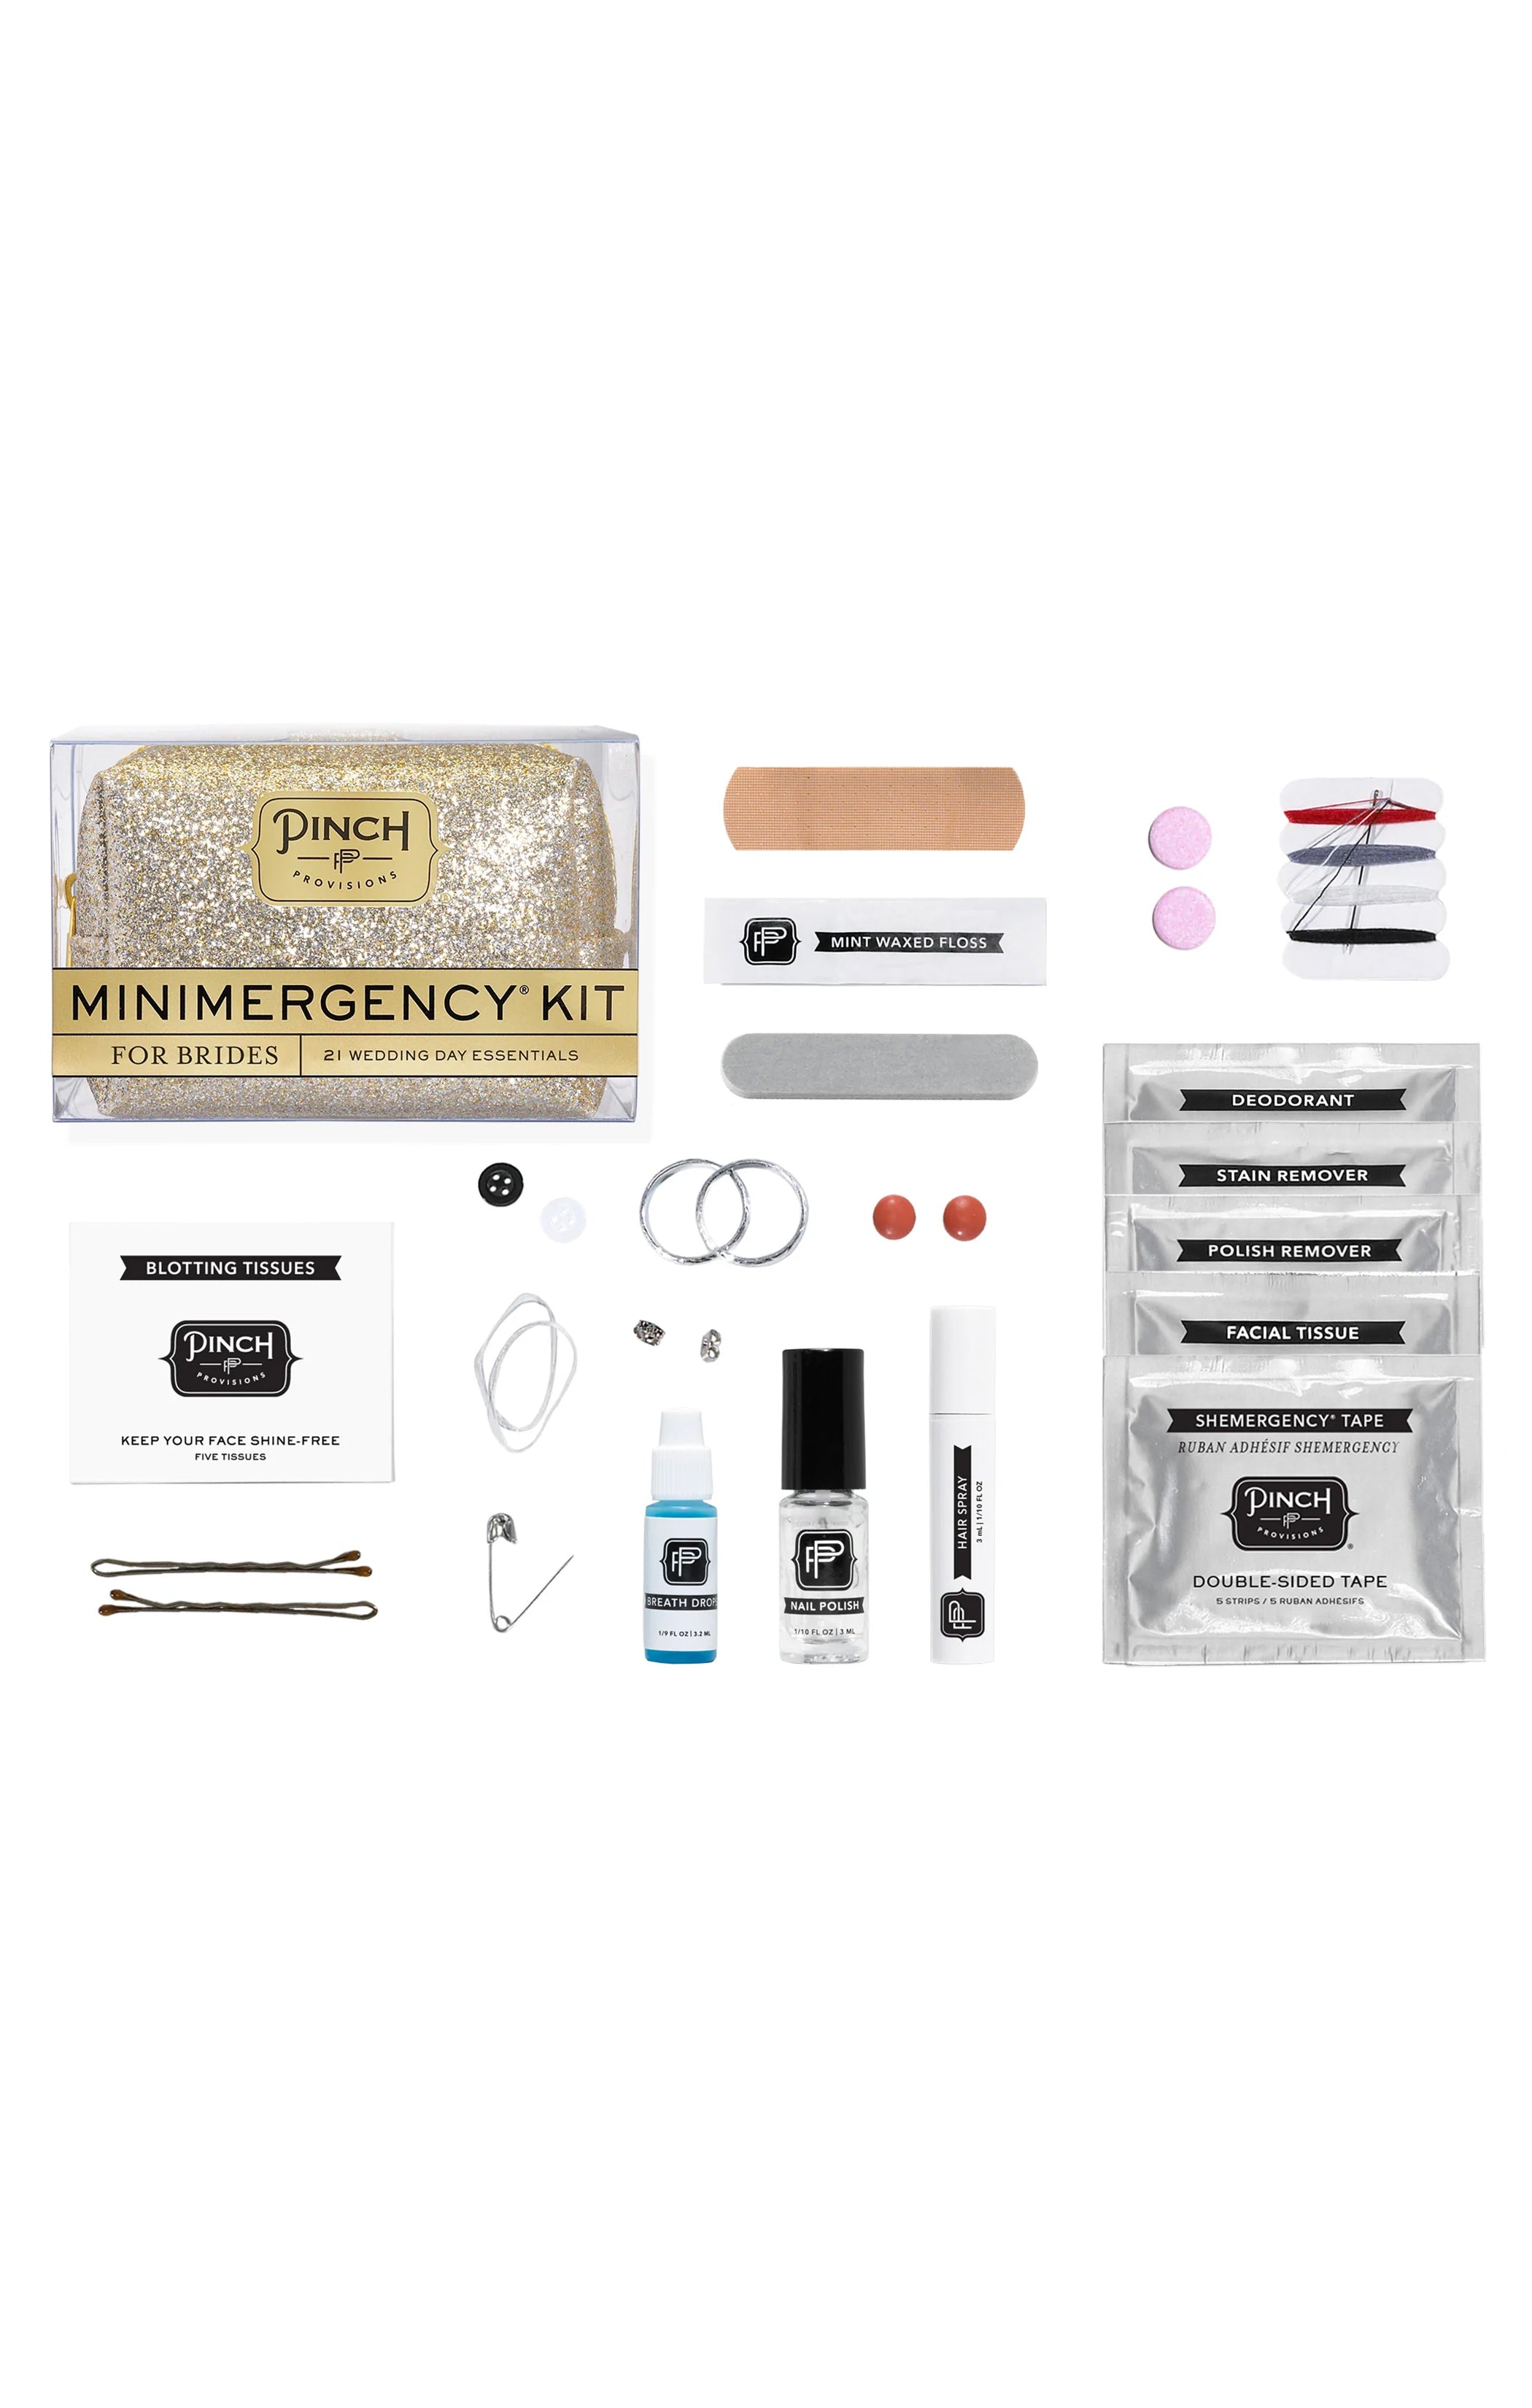 Pinch Provisions White and Gold Swirl Minimergency Kit for Brides, Includes  21 Must-Have Essential Items for The Big Day, Compact, Multi-Functional